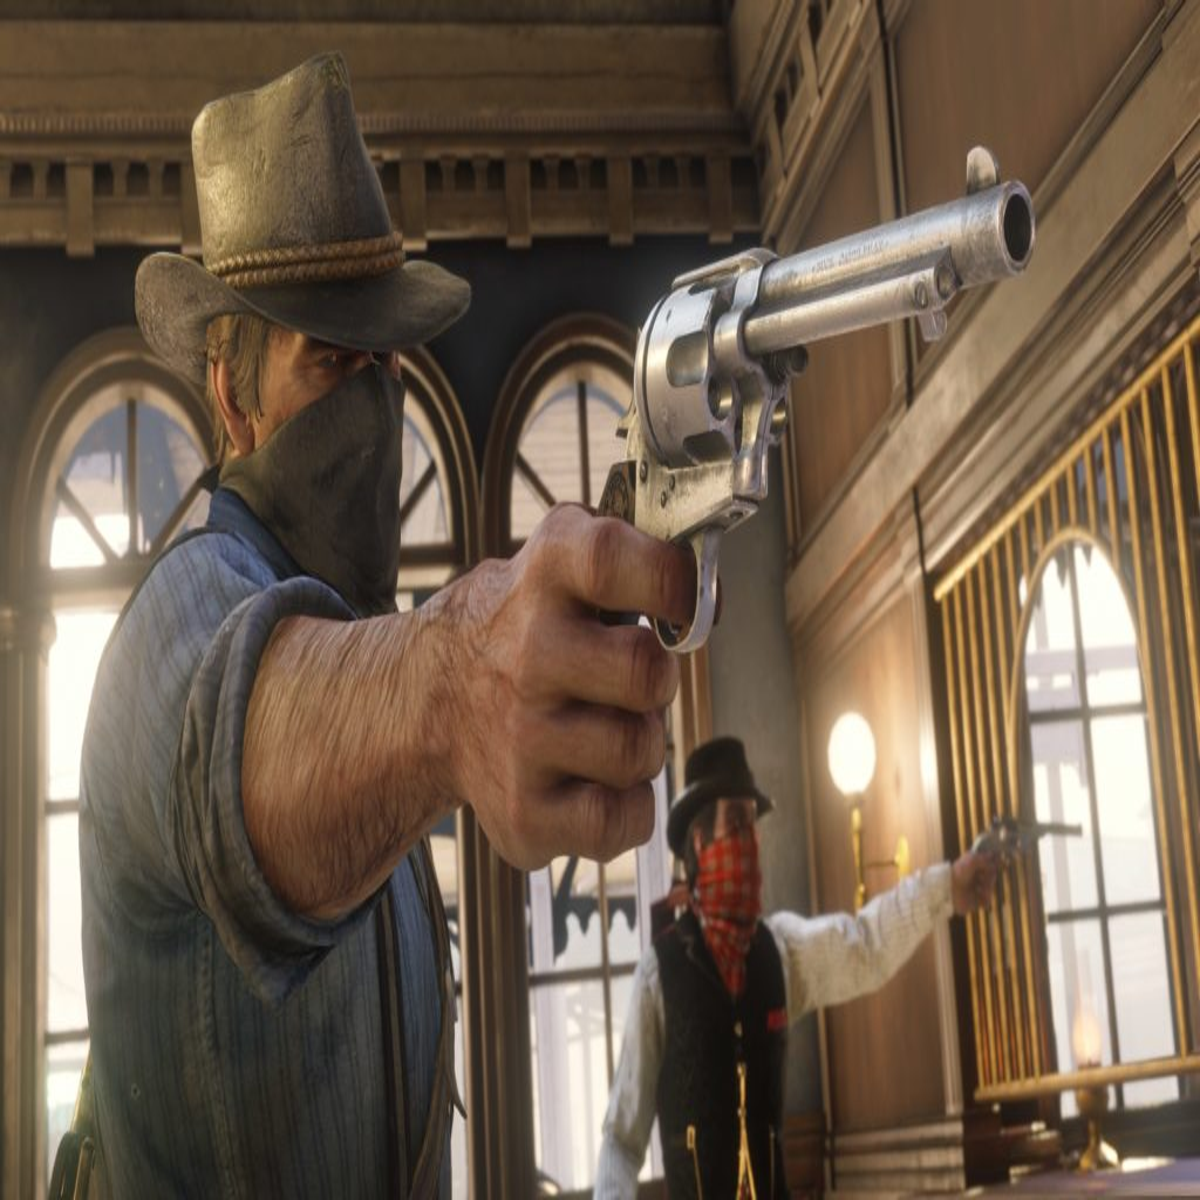 First-Person Shooters on X: Red Dead Redemption 2 (by Rockstar North /  Leeds / London 🇬🇧 Rockstar San Diego / New England 🇺🇸 Rockstar Toronto  🇨🇦 Rockstar India 🇮🇳, 2018). #FPS #TPS #